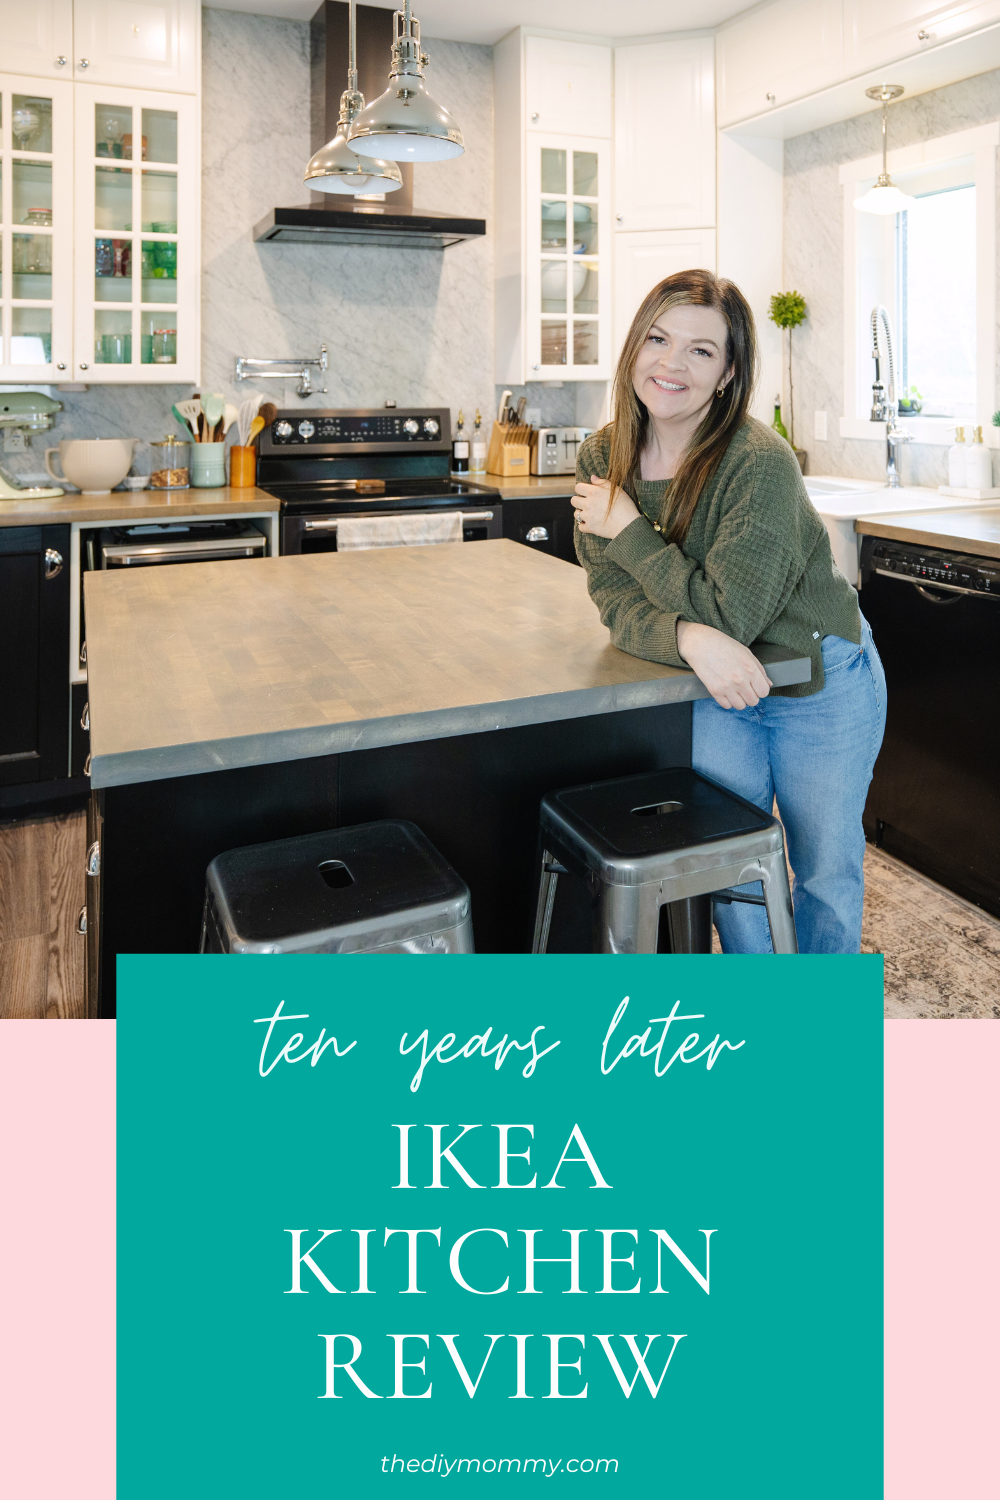 IKEA kitchen review 10 years later